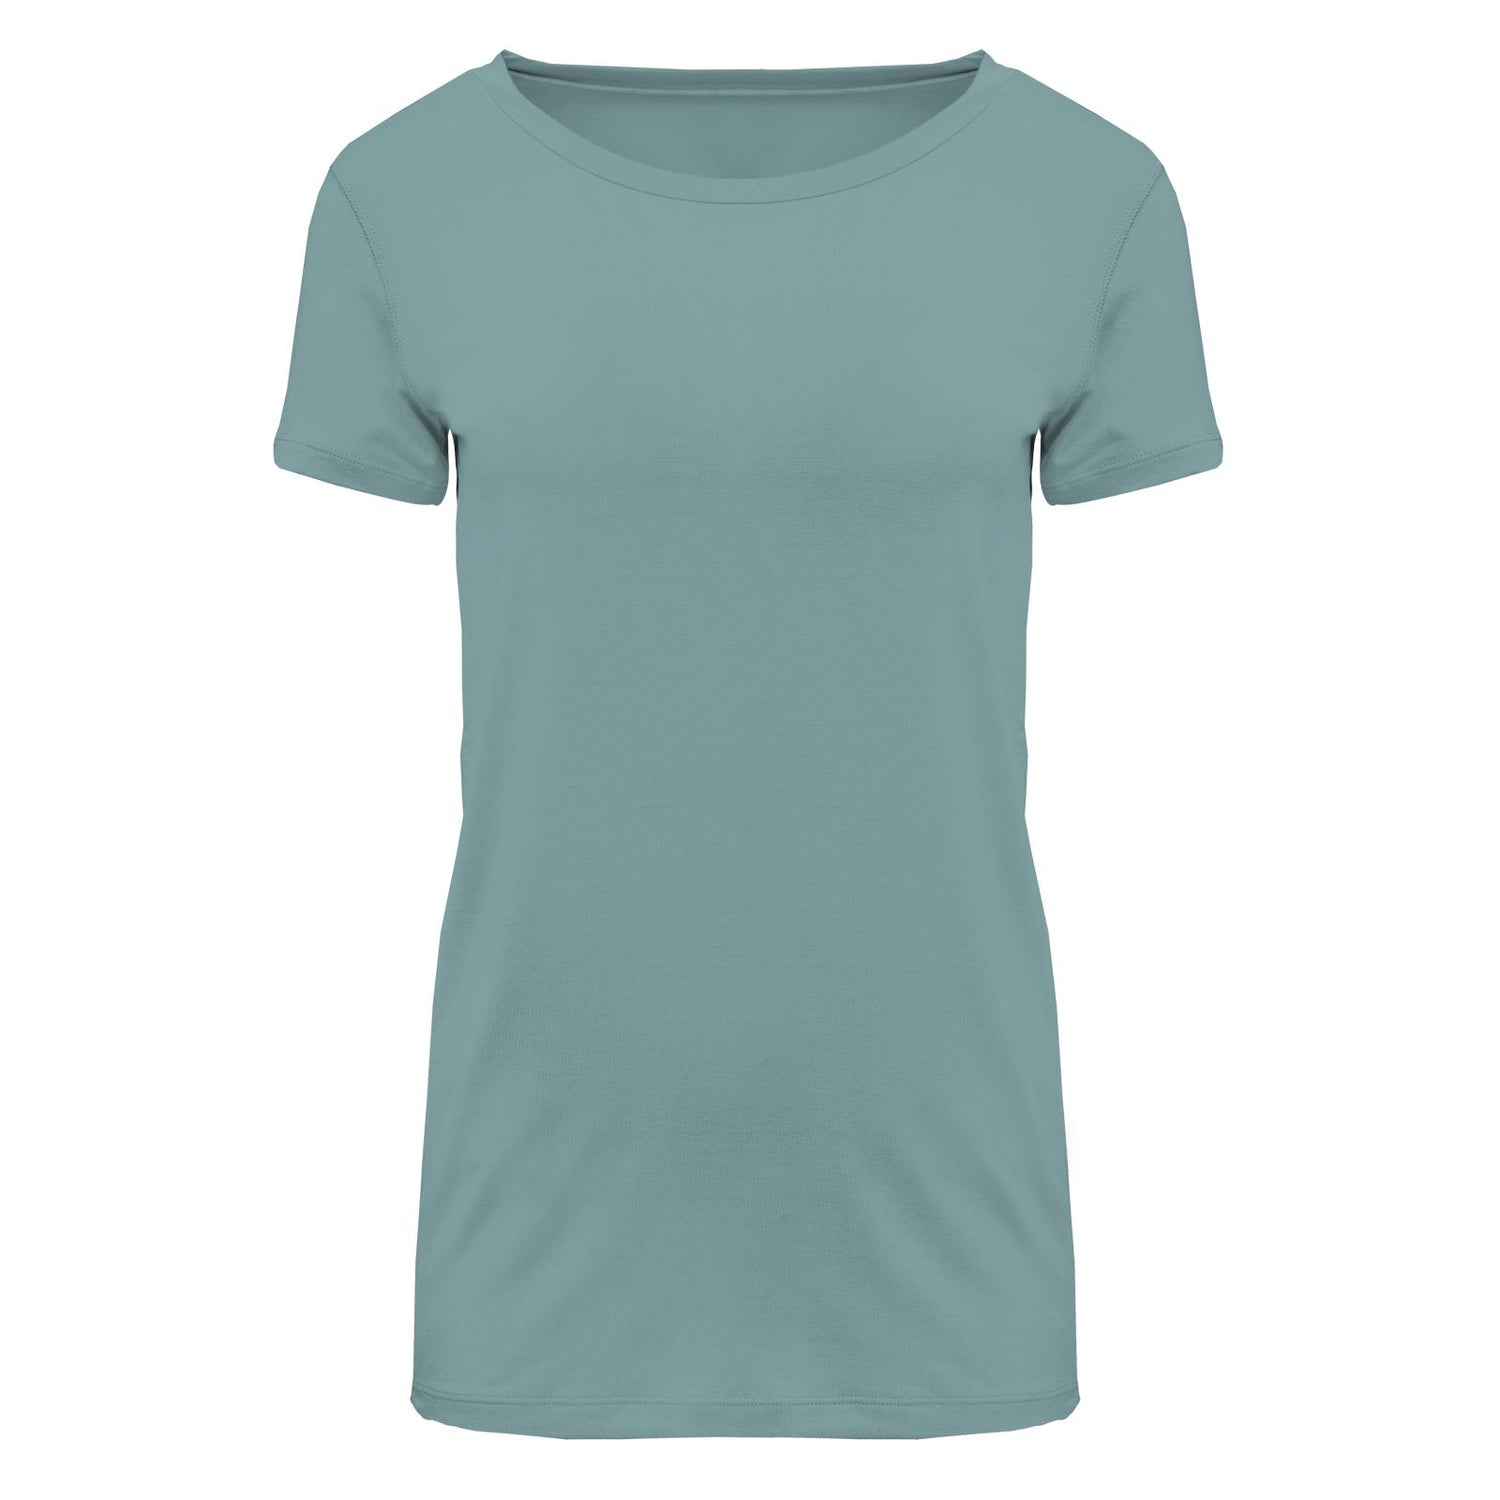 Women's Solid Short Sleeve Relaxed Tee in Jade